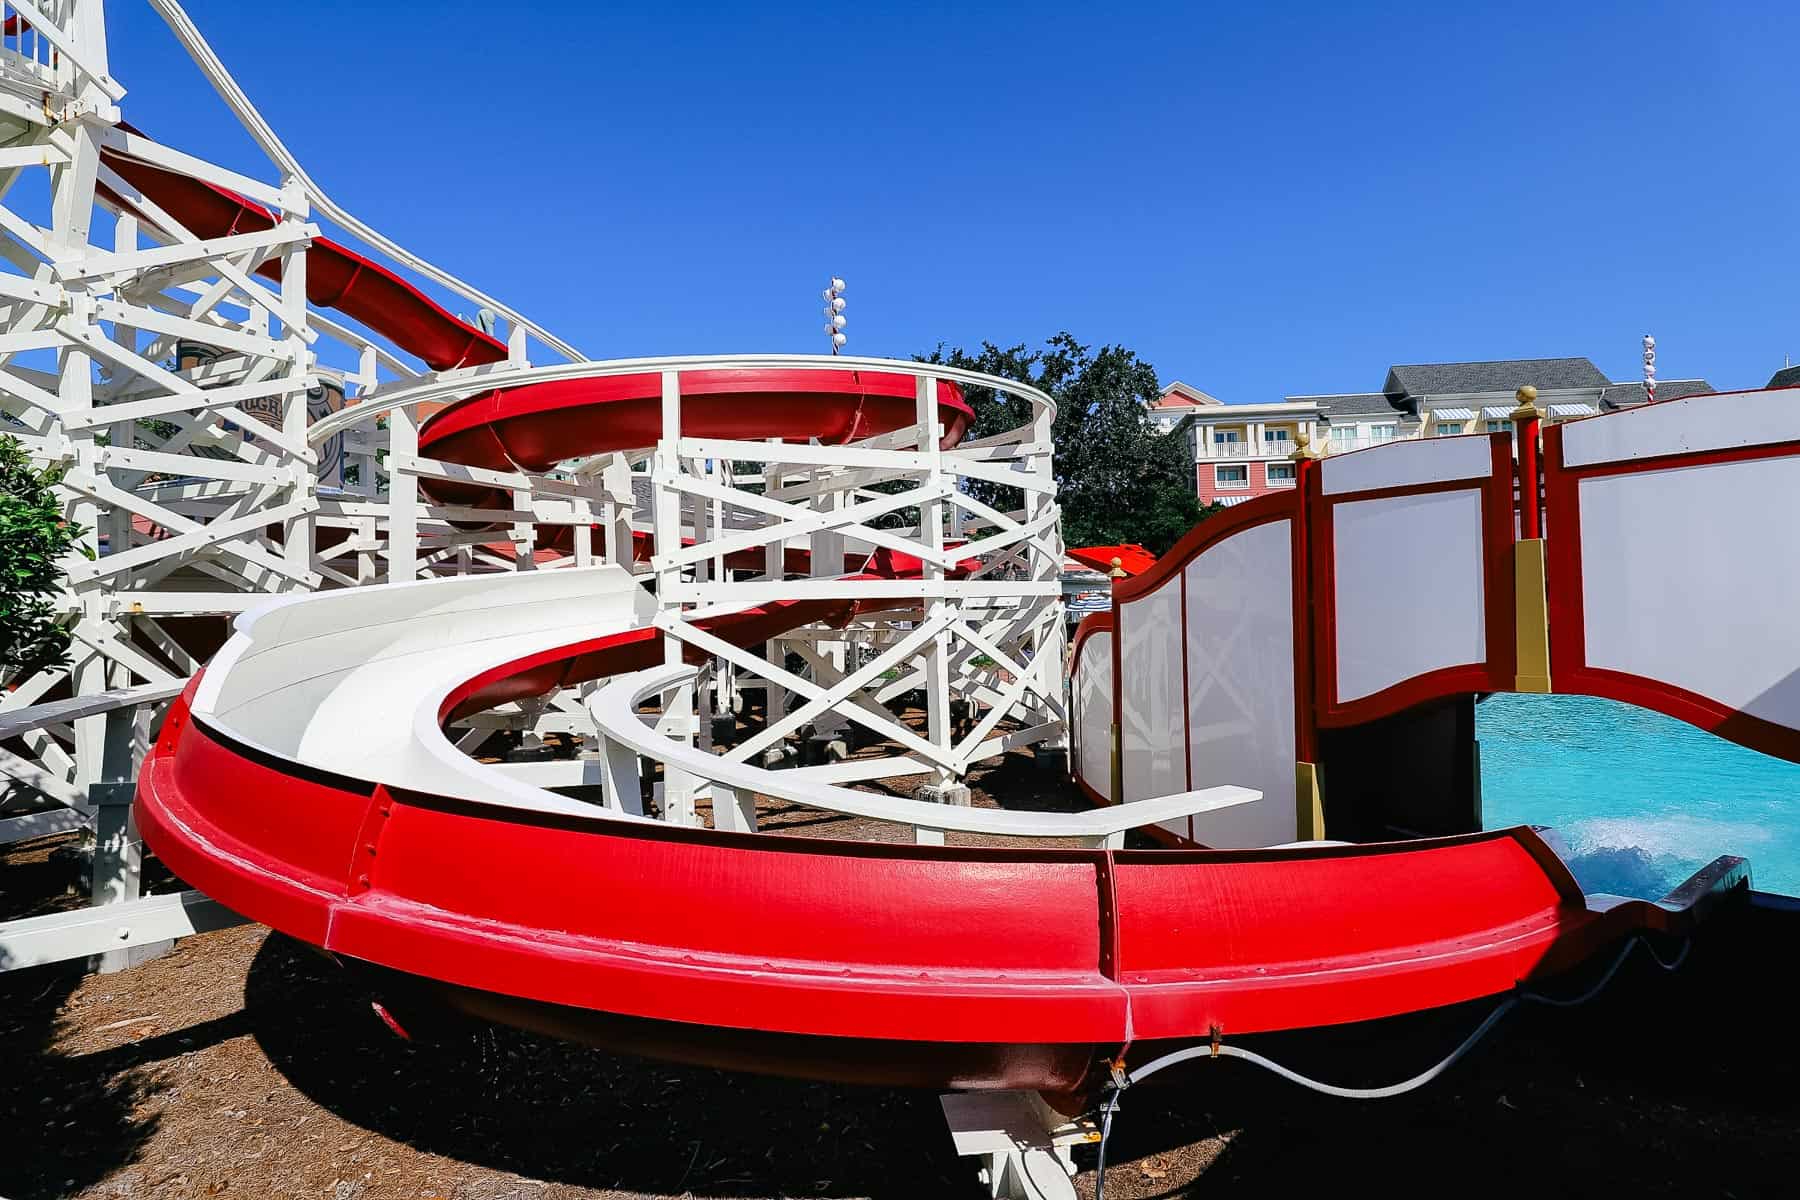 the curves of the slide at Disney's Boardwalk